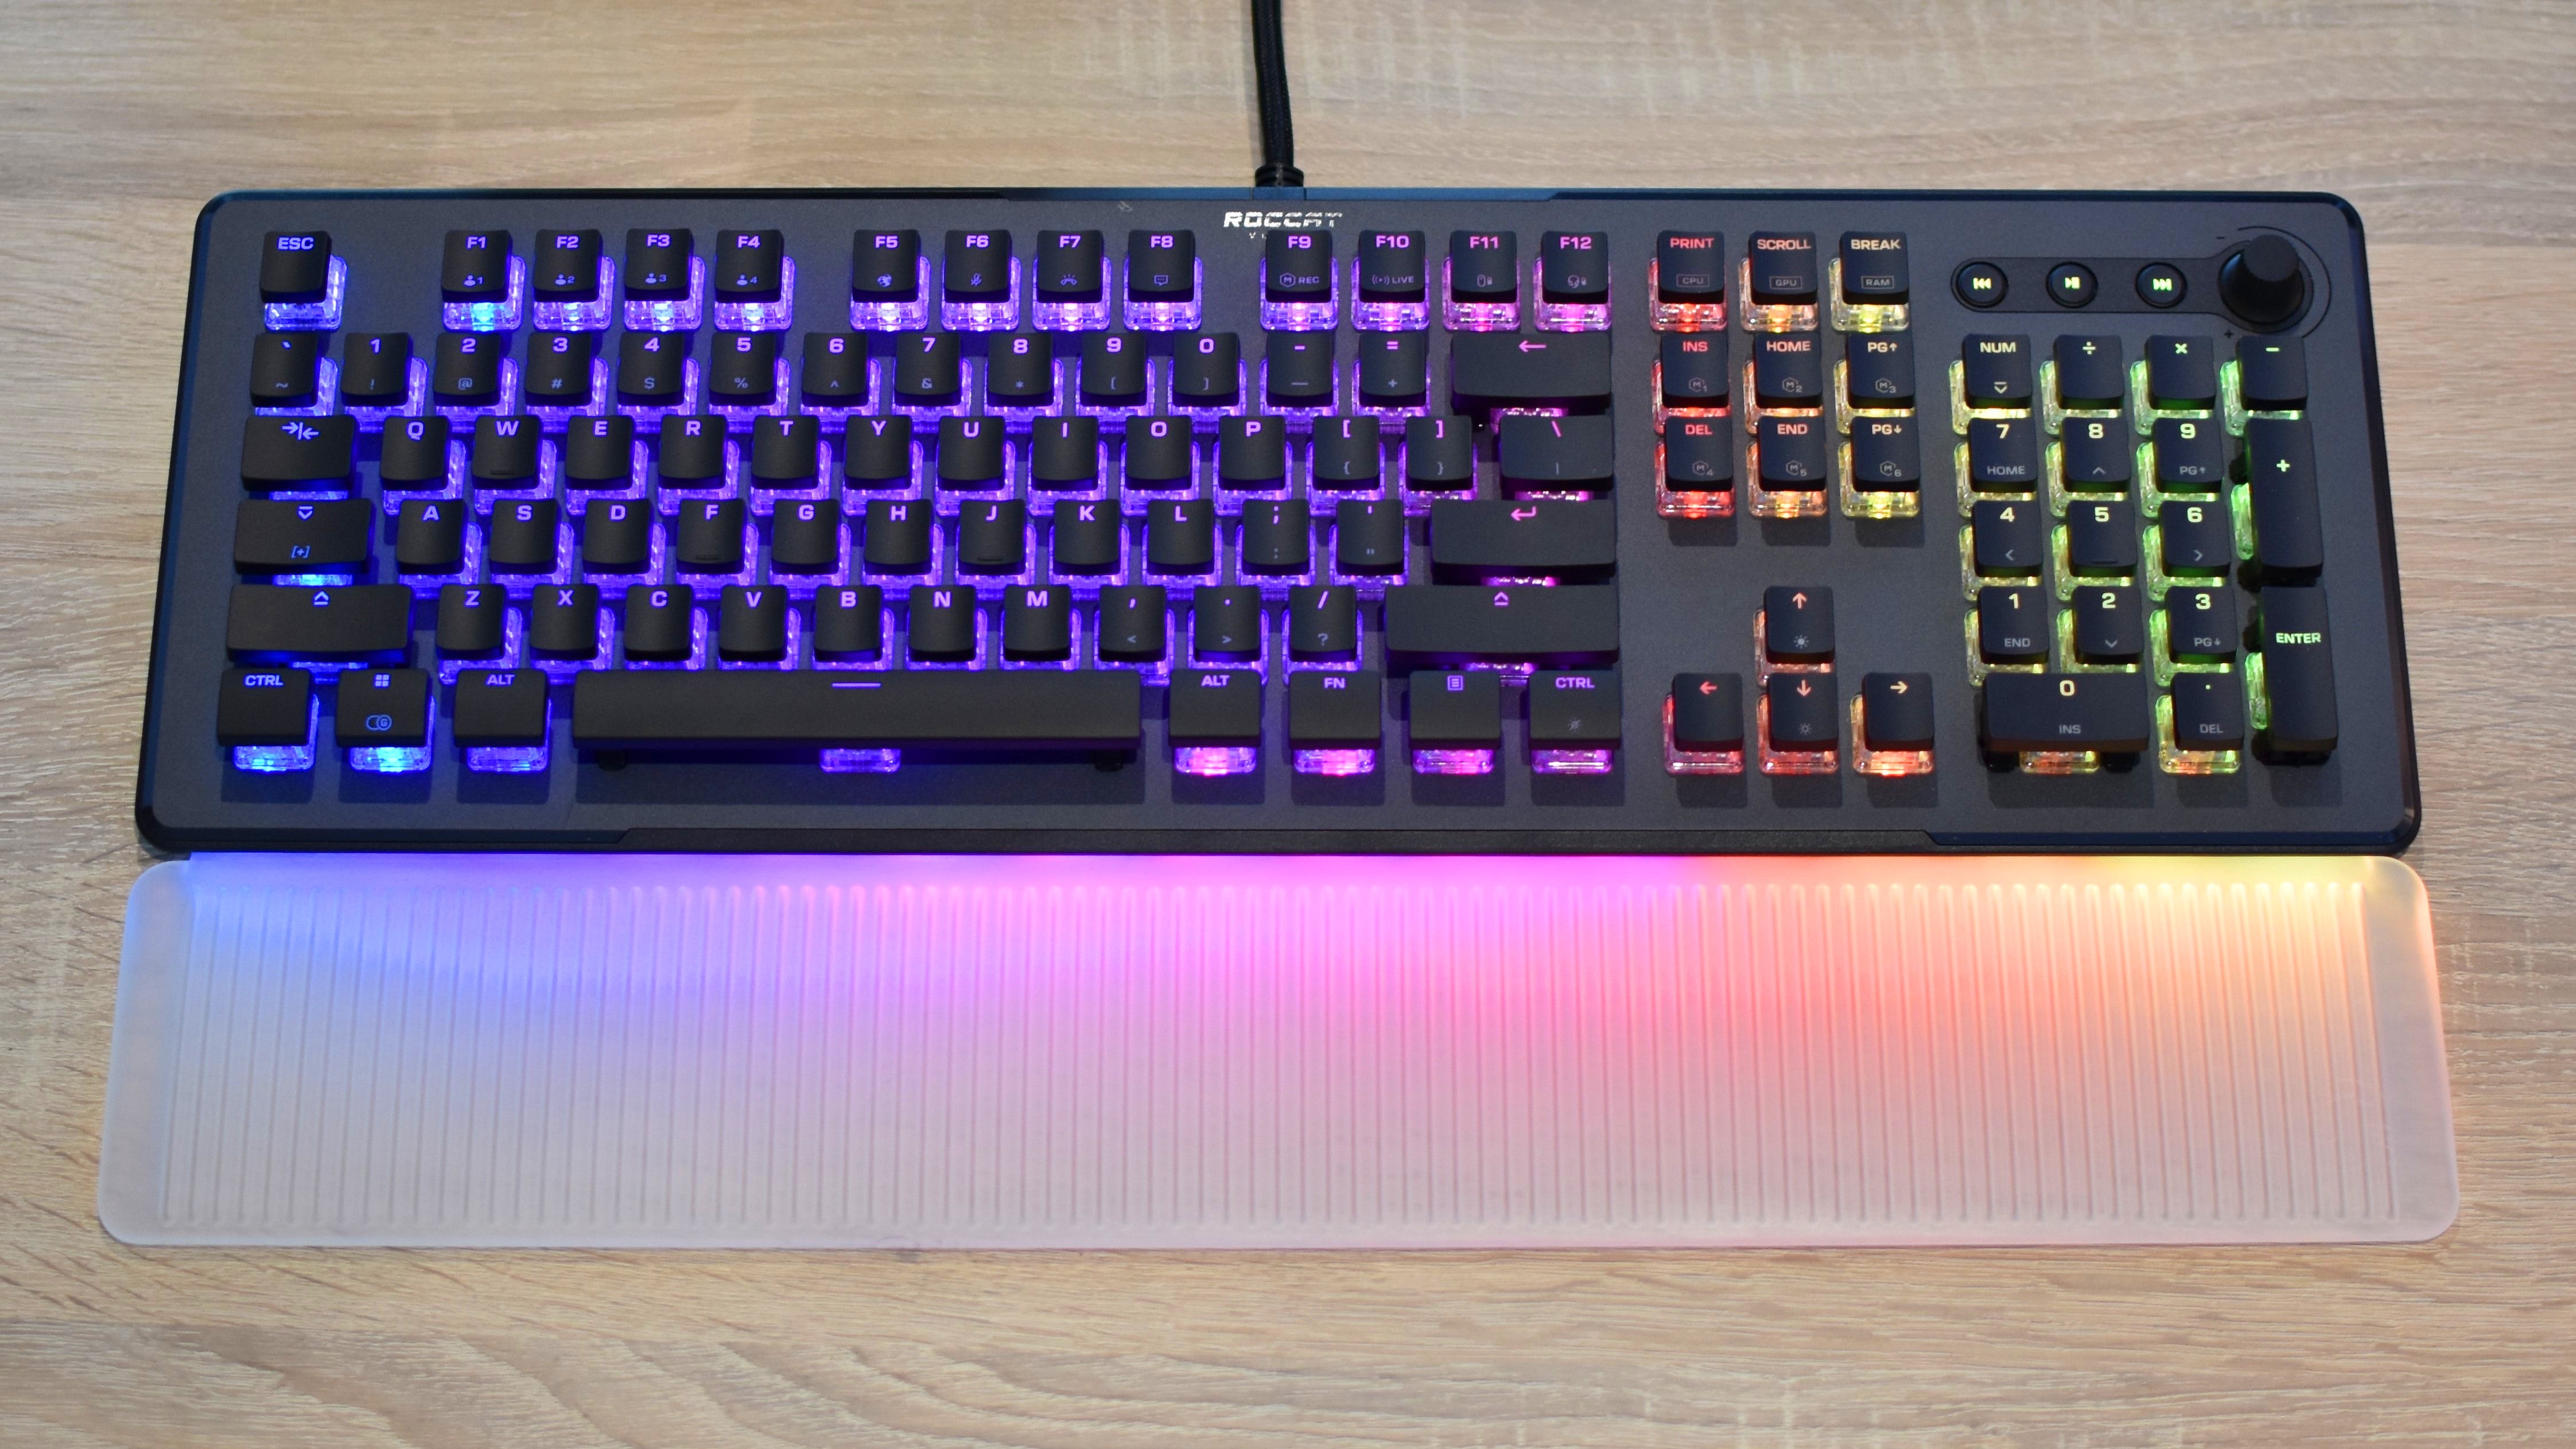 The Roccat Vulcan II Max gaming keyboard on a desk.